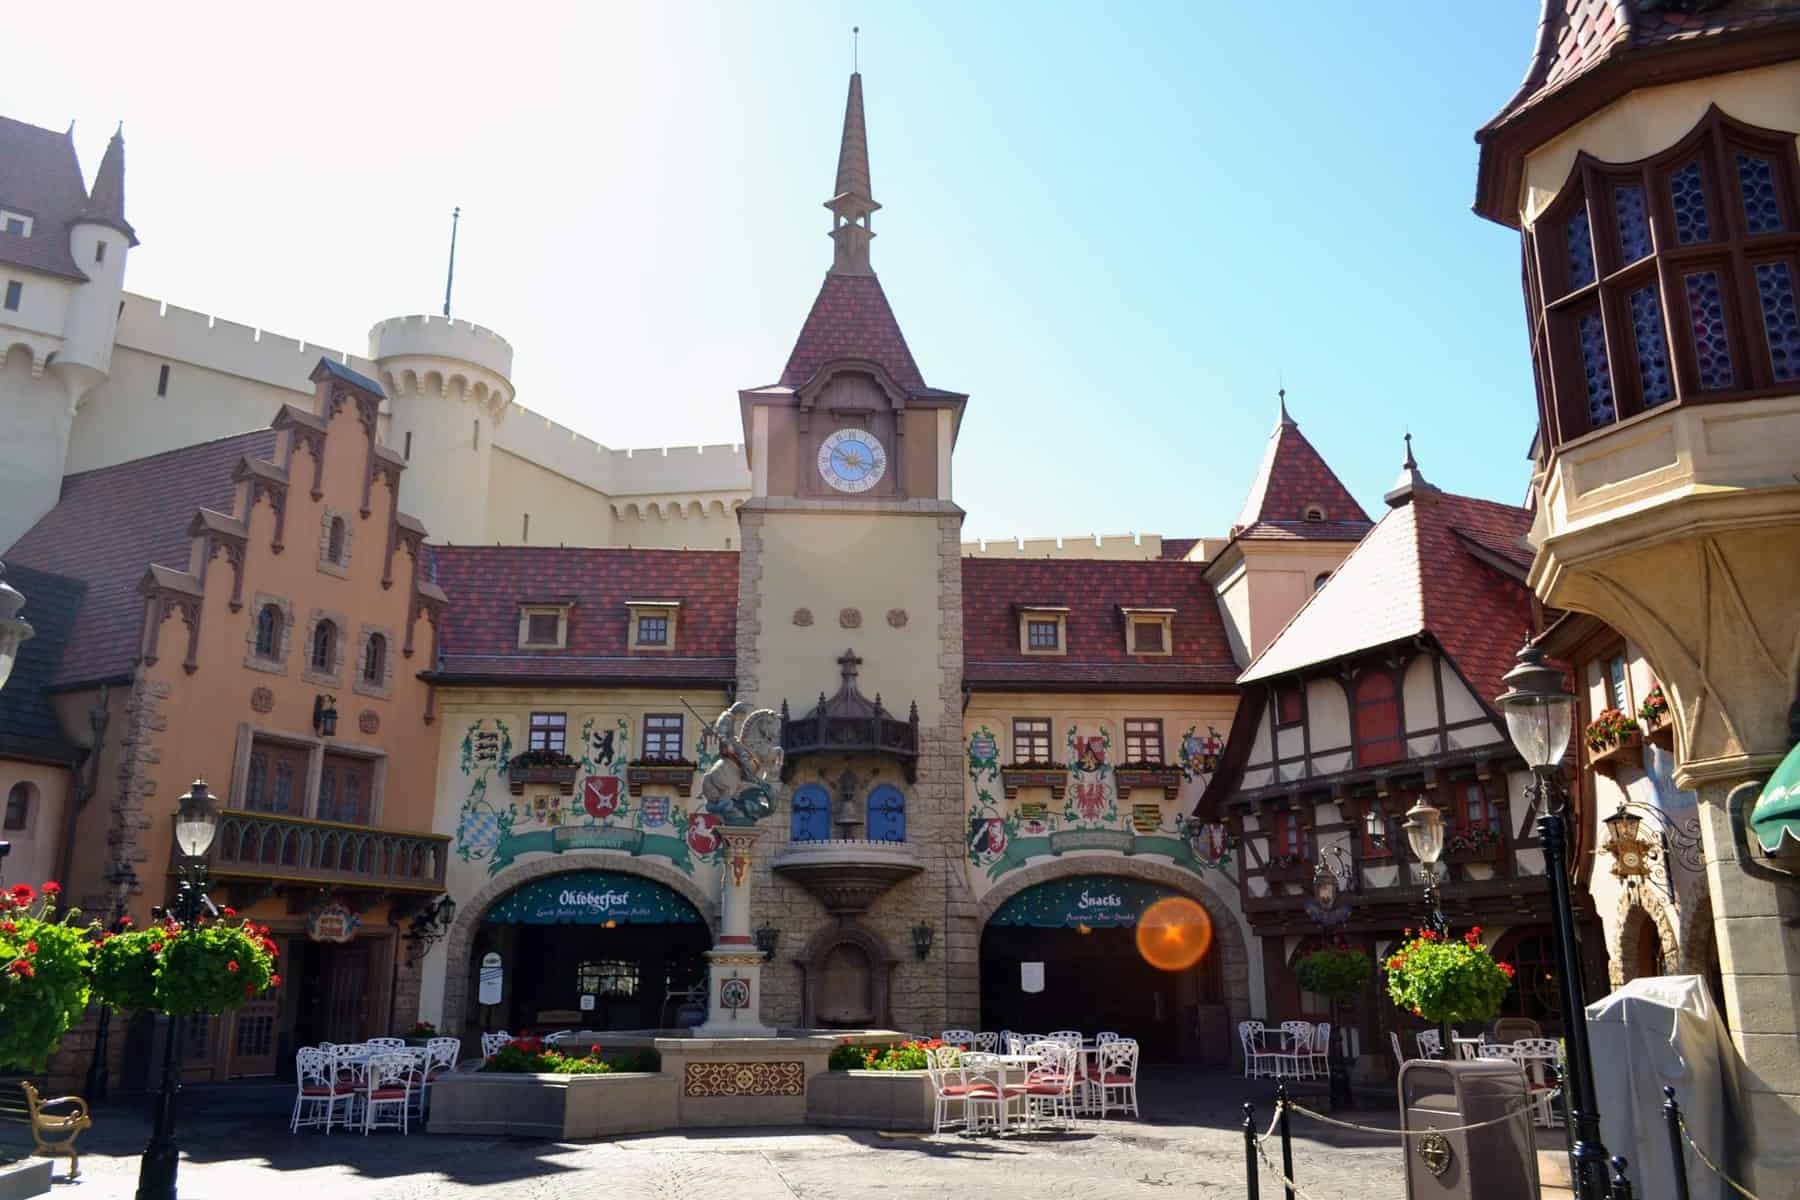 A deep dive into the Germany pavilion at Epcot (snacks, beer, best Harmonious views)